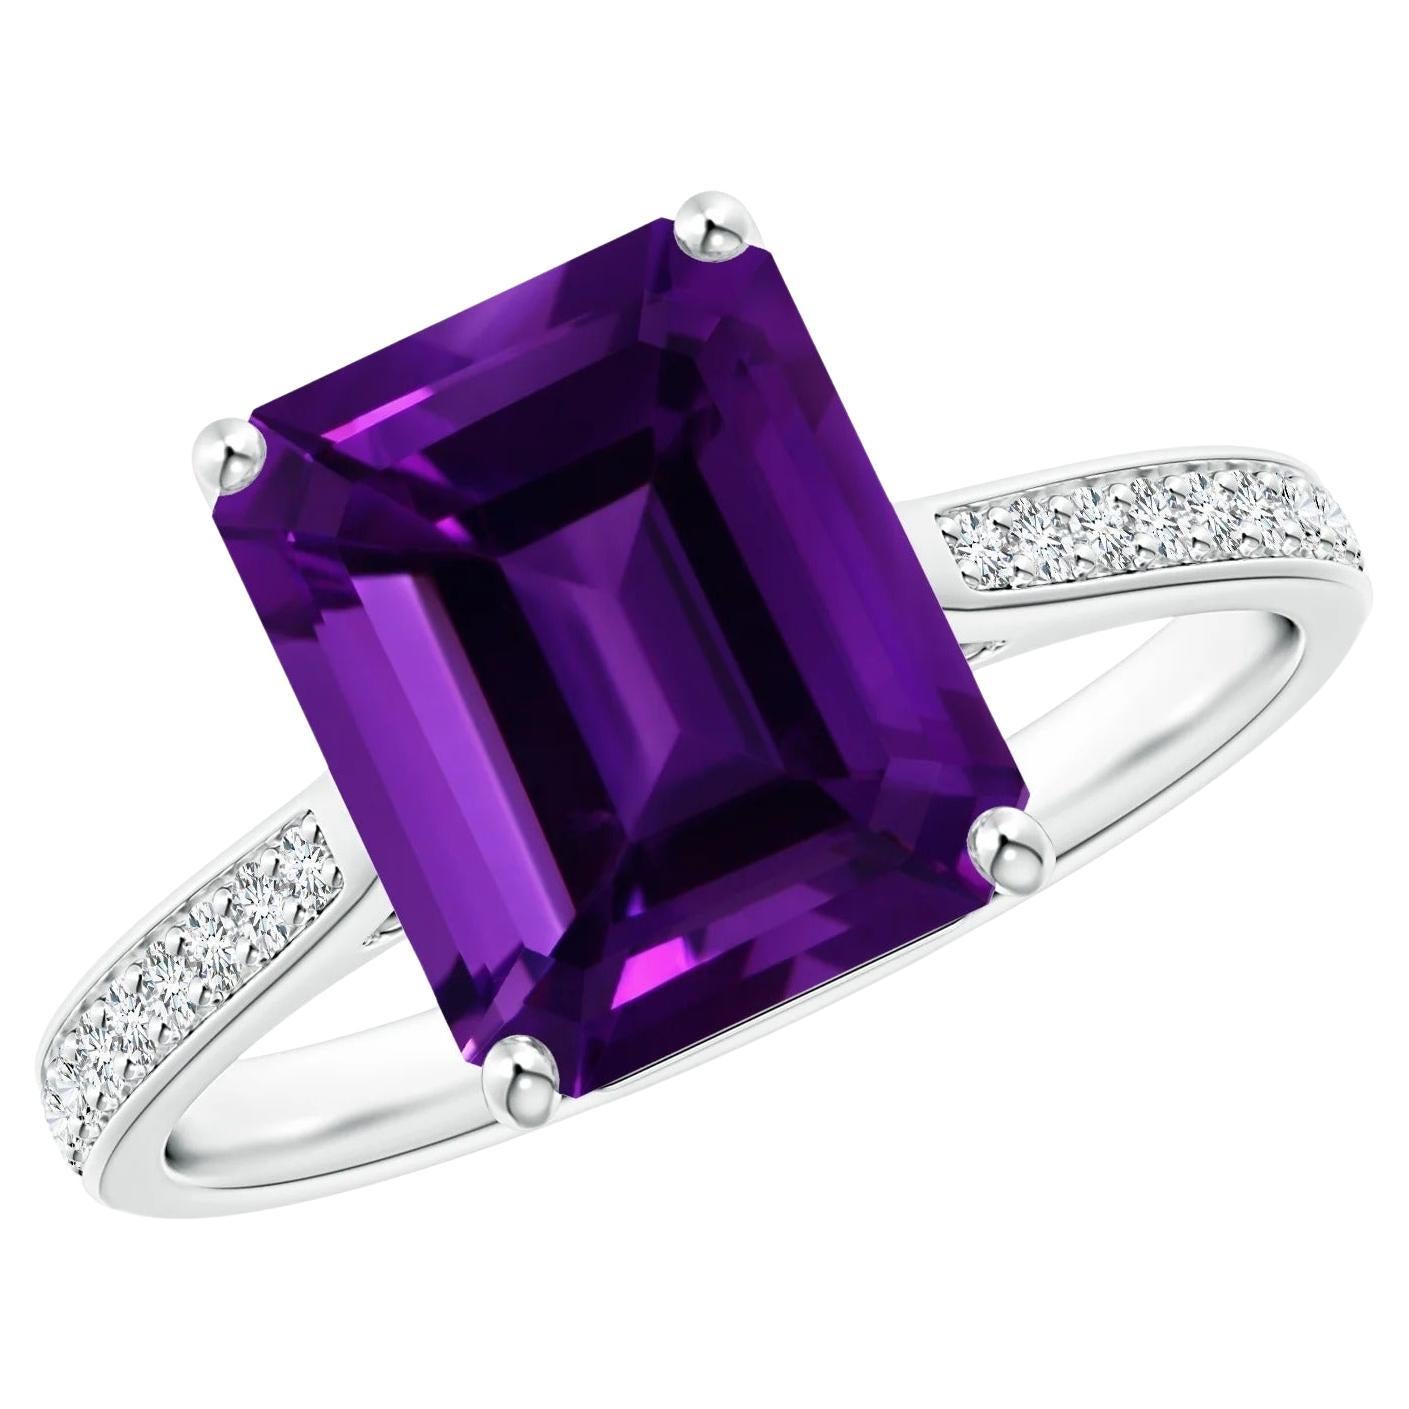 For Sale:  ANGARA GIA Certified Natural Amethyst Cocktail Ring in White Gold with Diamonds